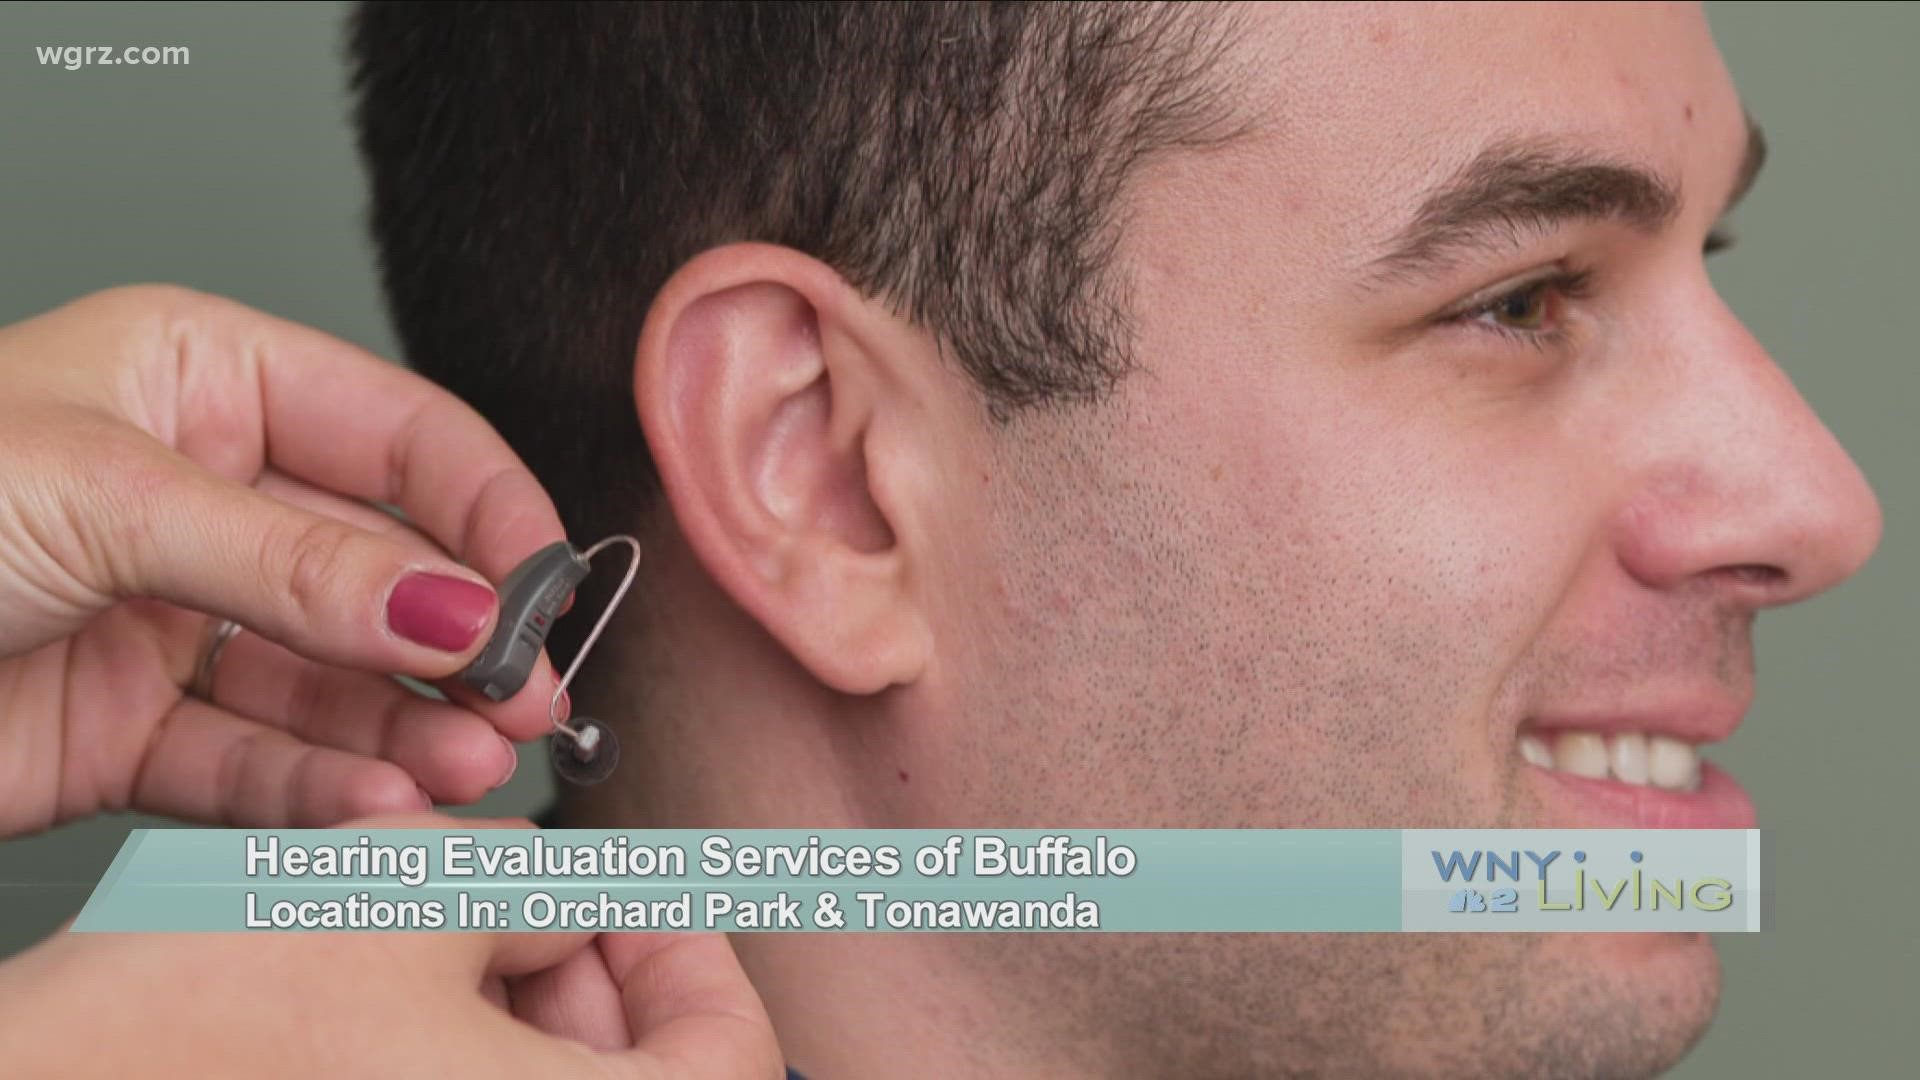 WNY Living - January 22 - Hearing Evaluation Services of Buffalo (THIS VIDEO IS SPONSORED BY HEARING EVALUATION SERVICES OF BUFFALO)